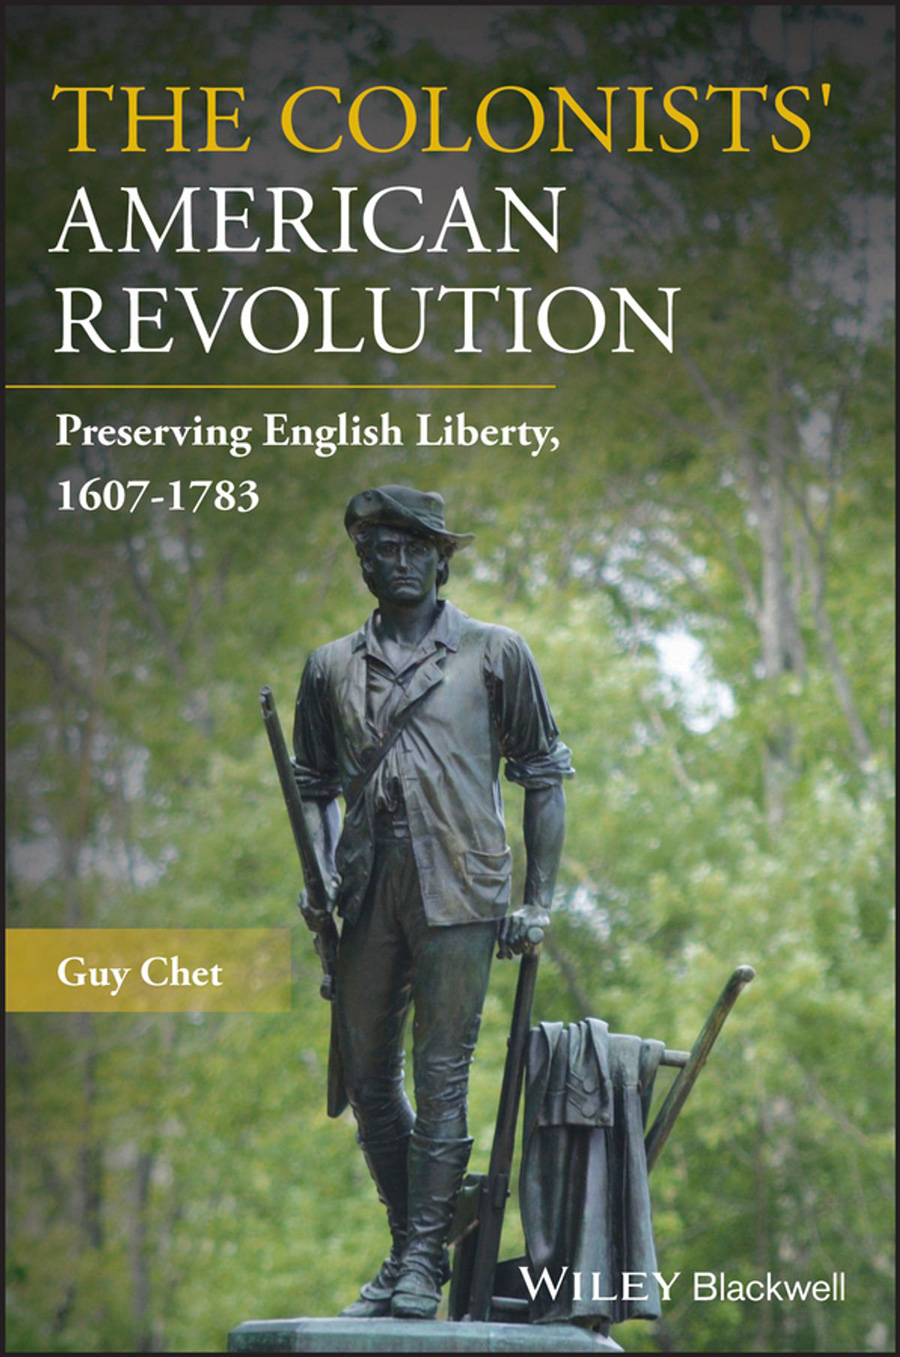 The Colonists' American Revolution Preserving English Liberty